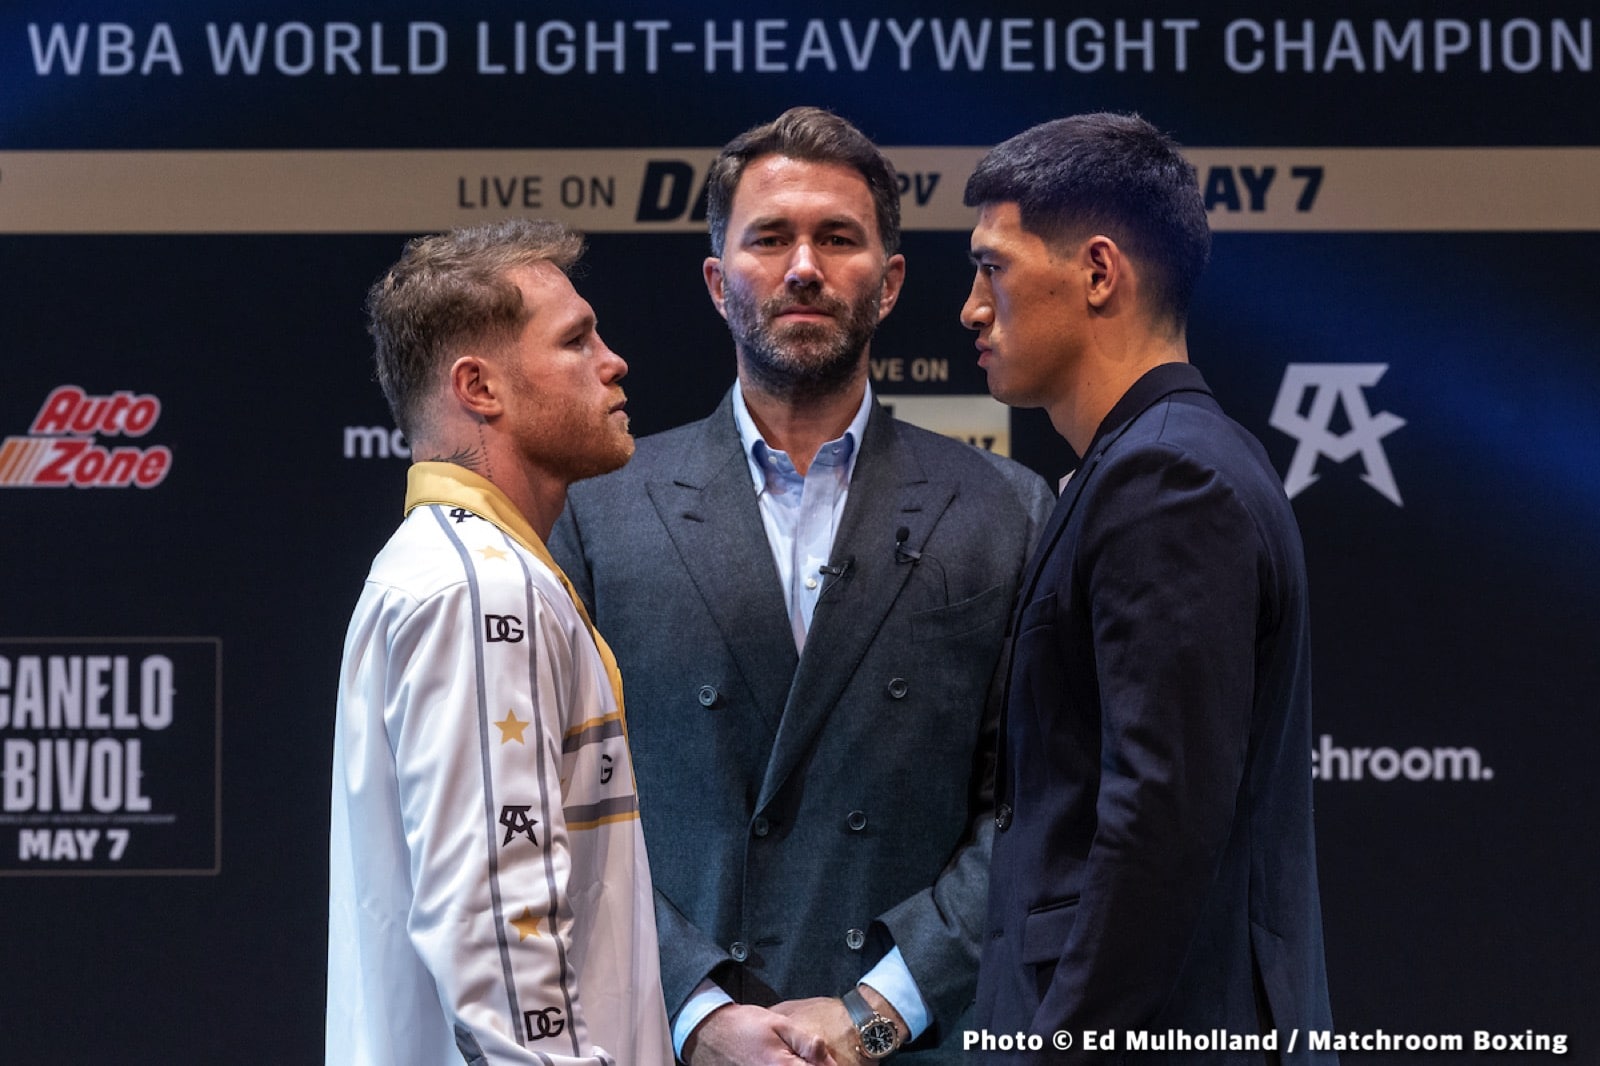 Image: Canelo vows to fight Bivol again, and use "new guidelines" 